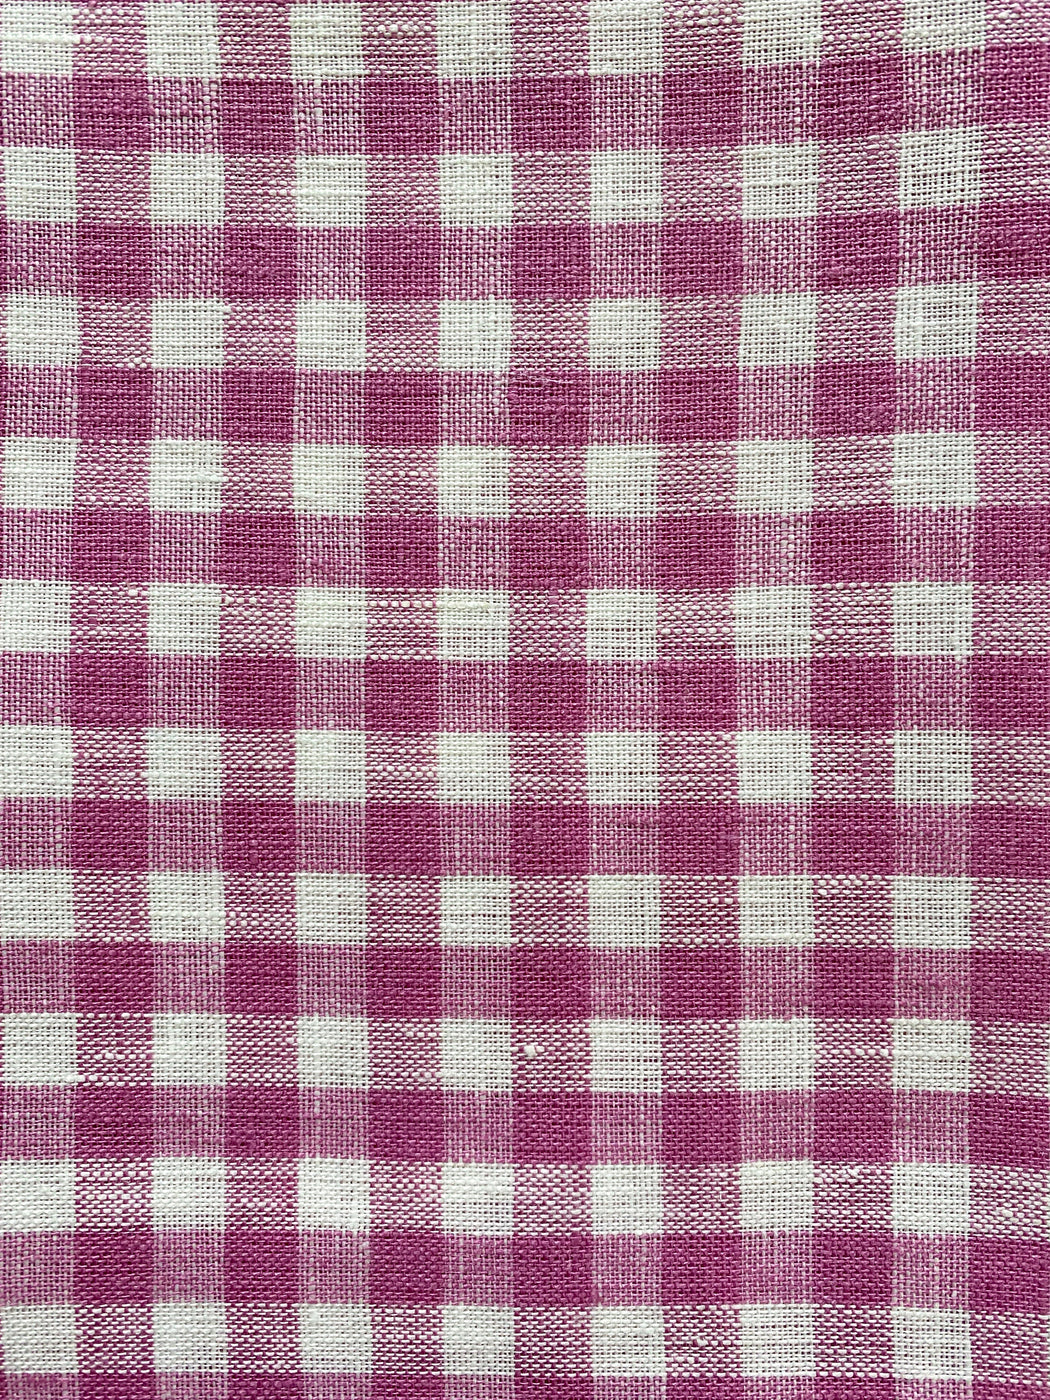 Pink Checked Tea Towel by Fog Linen Work